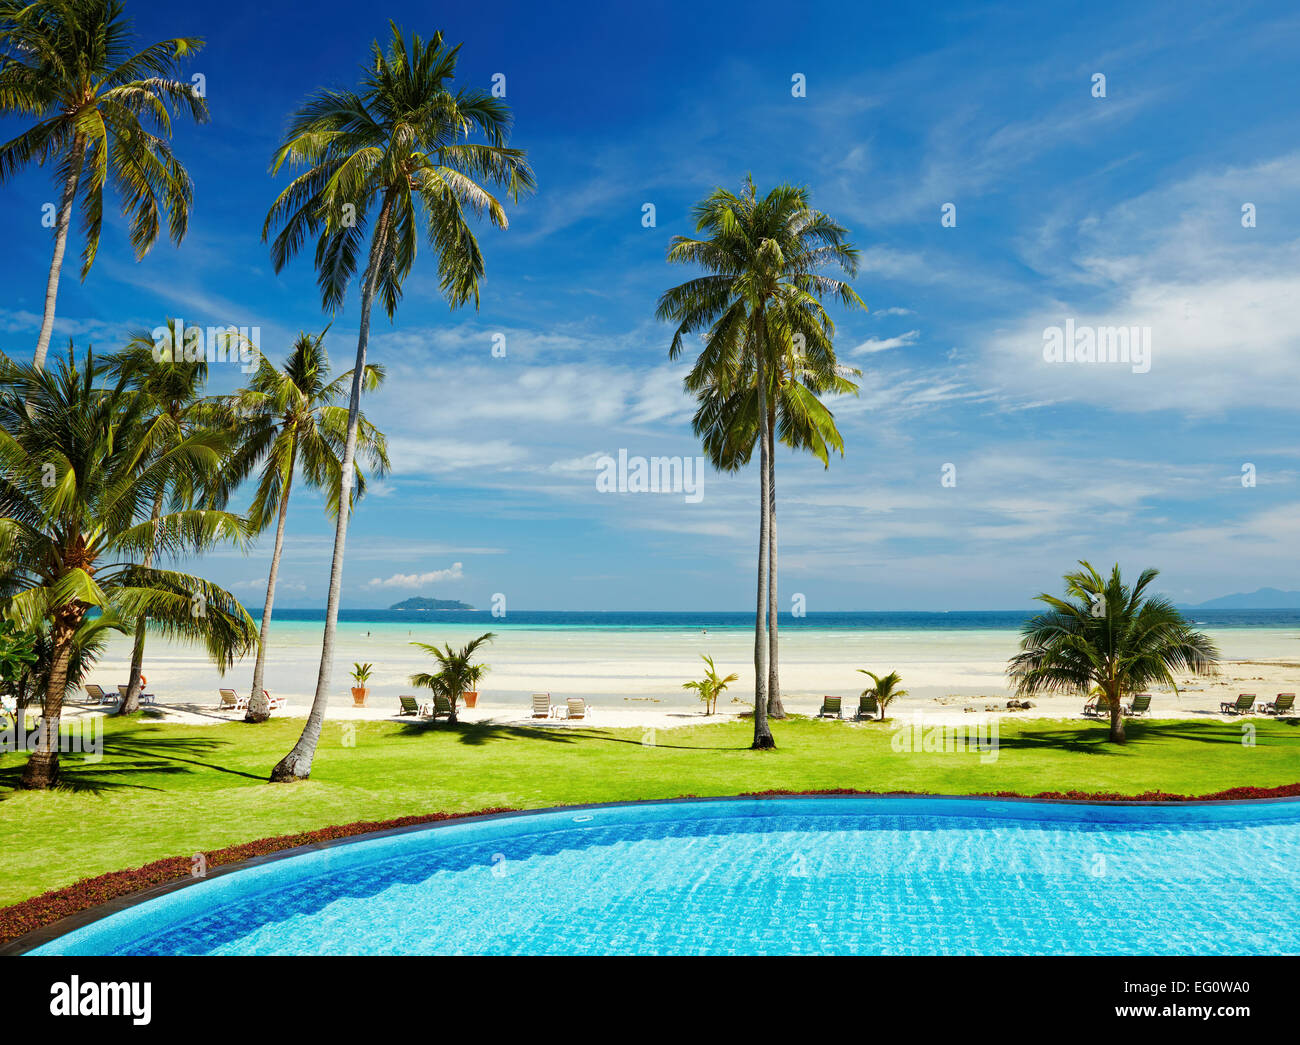 Tropical beach with coconut palms and swimming pool Stock Photo